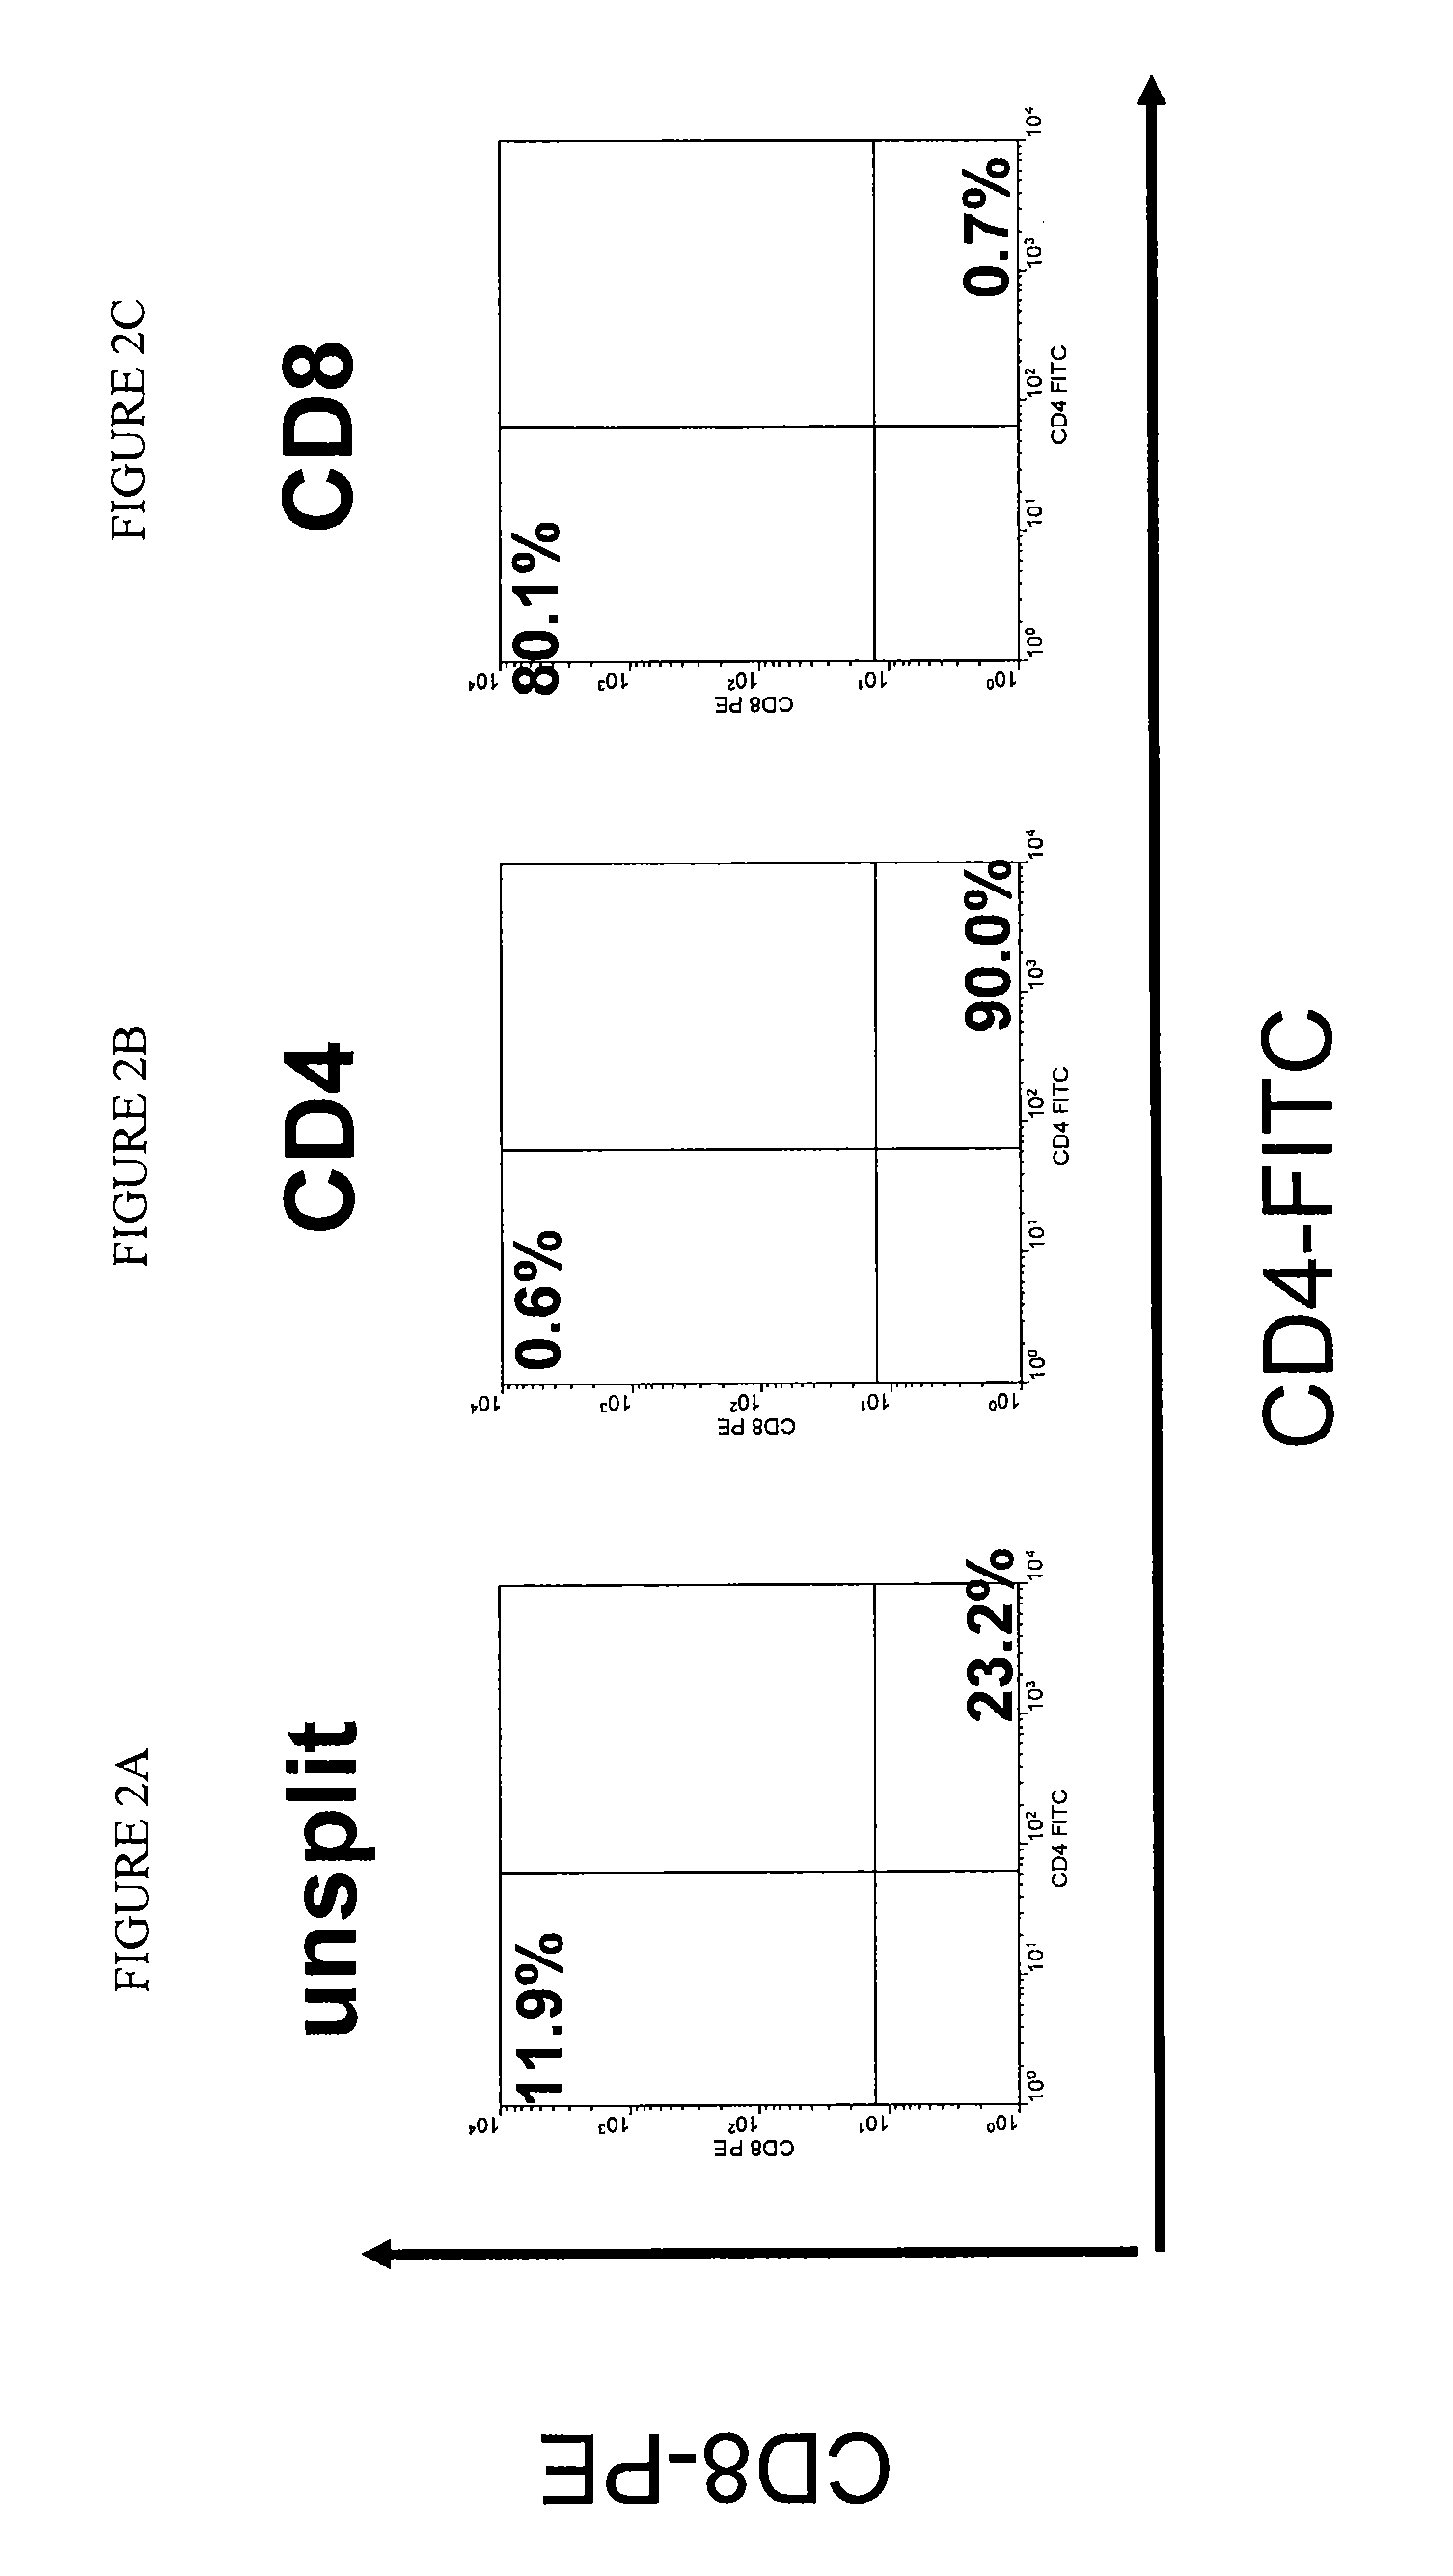 Compositions and methods for vaccinating against hsv-2